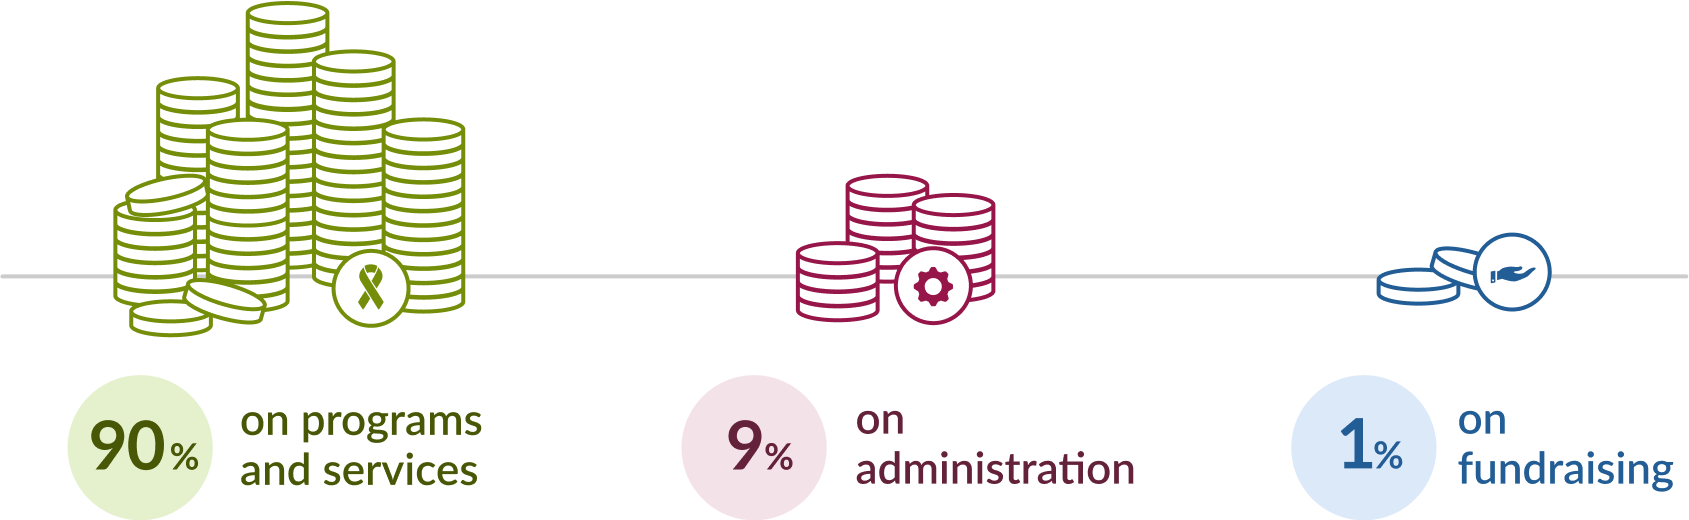 90% on programs and services, 9% on administration, 1% on fundraising